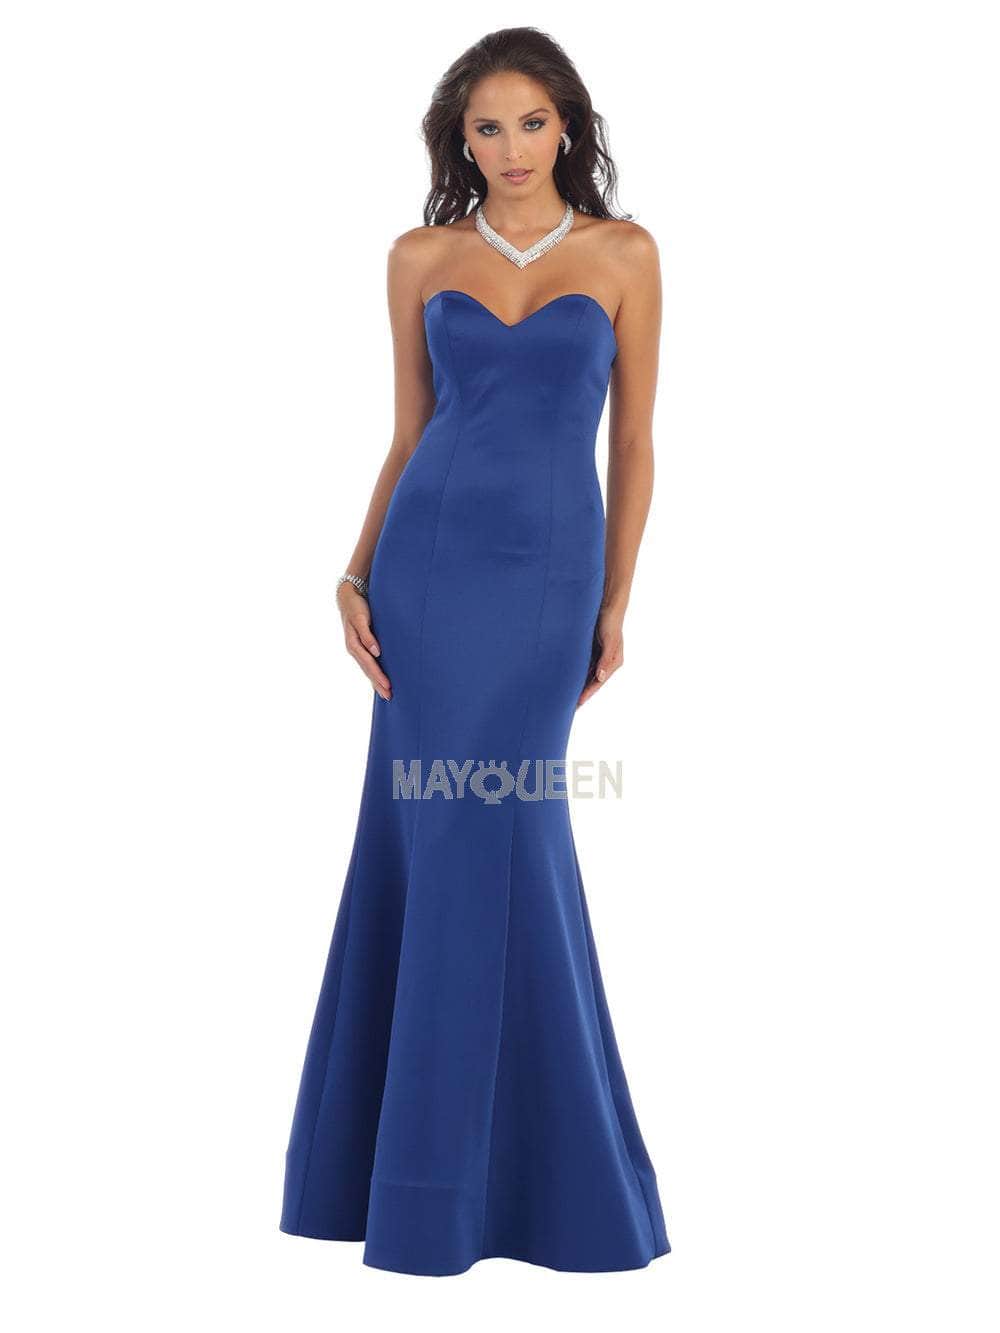 May Queen - RQ7305 Fitted Sweetheart Trumpet Gown